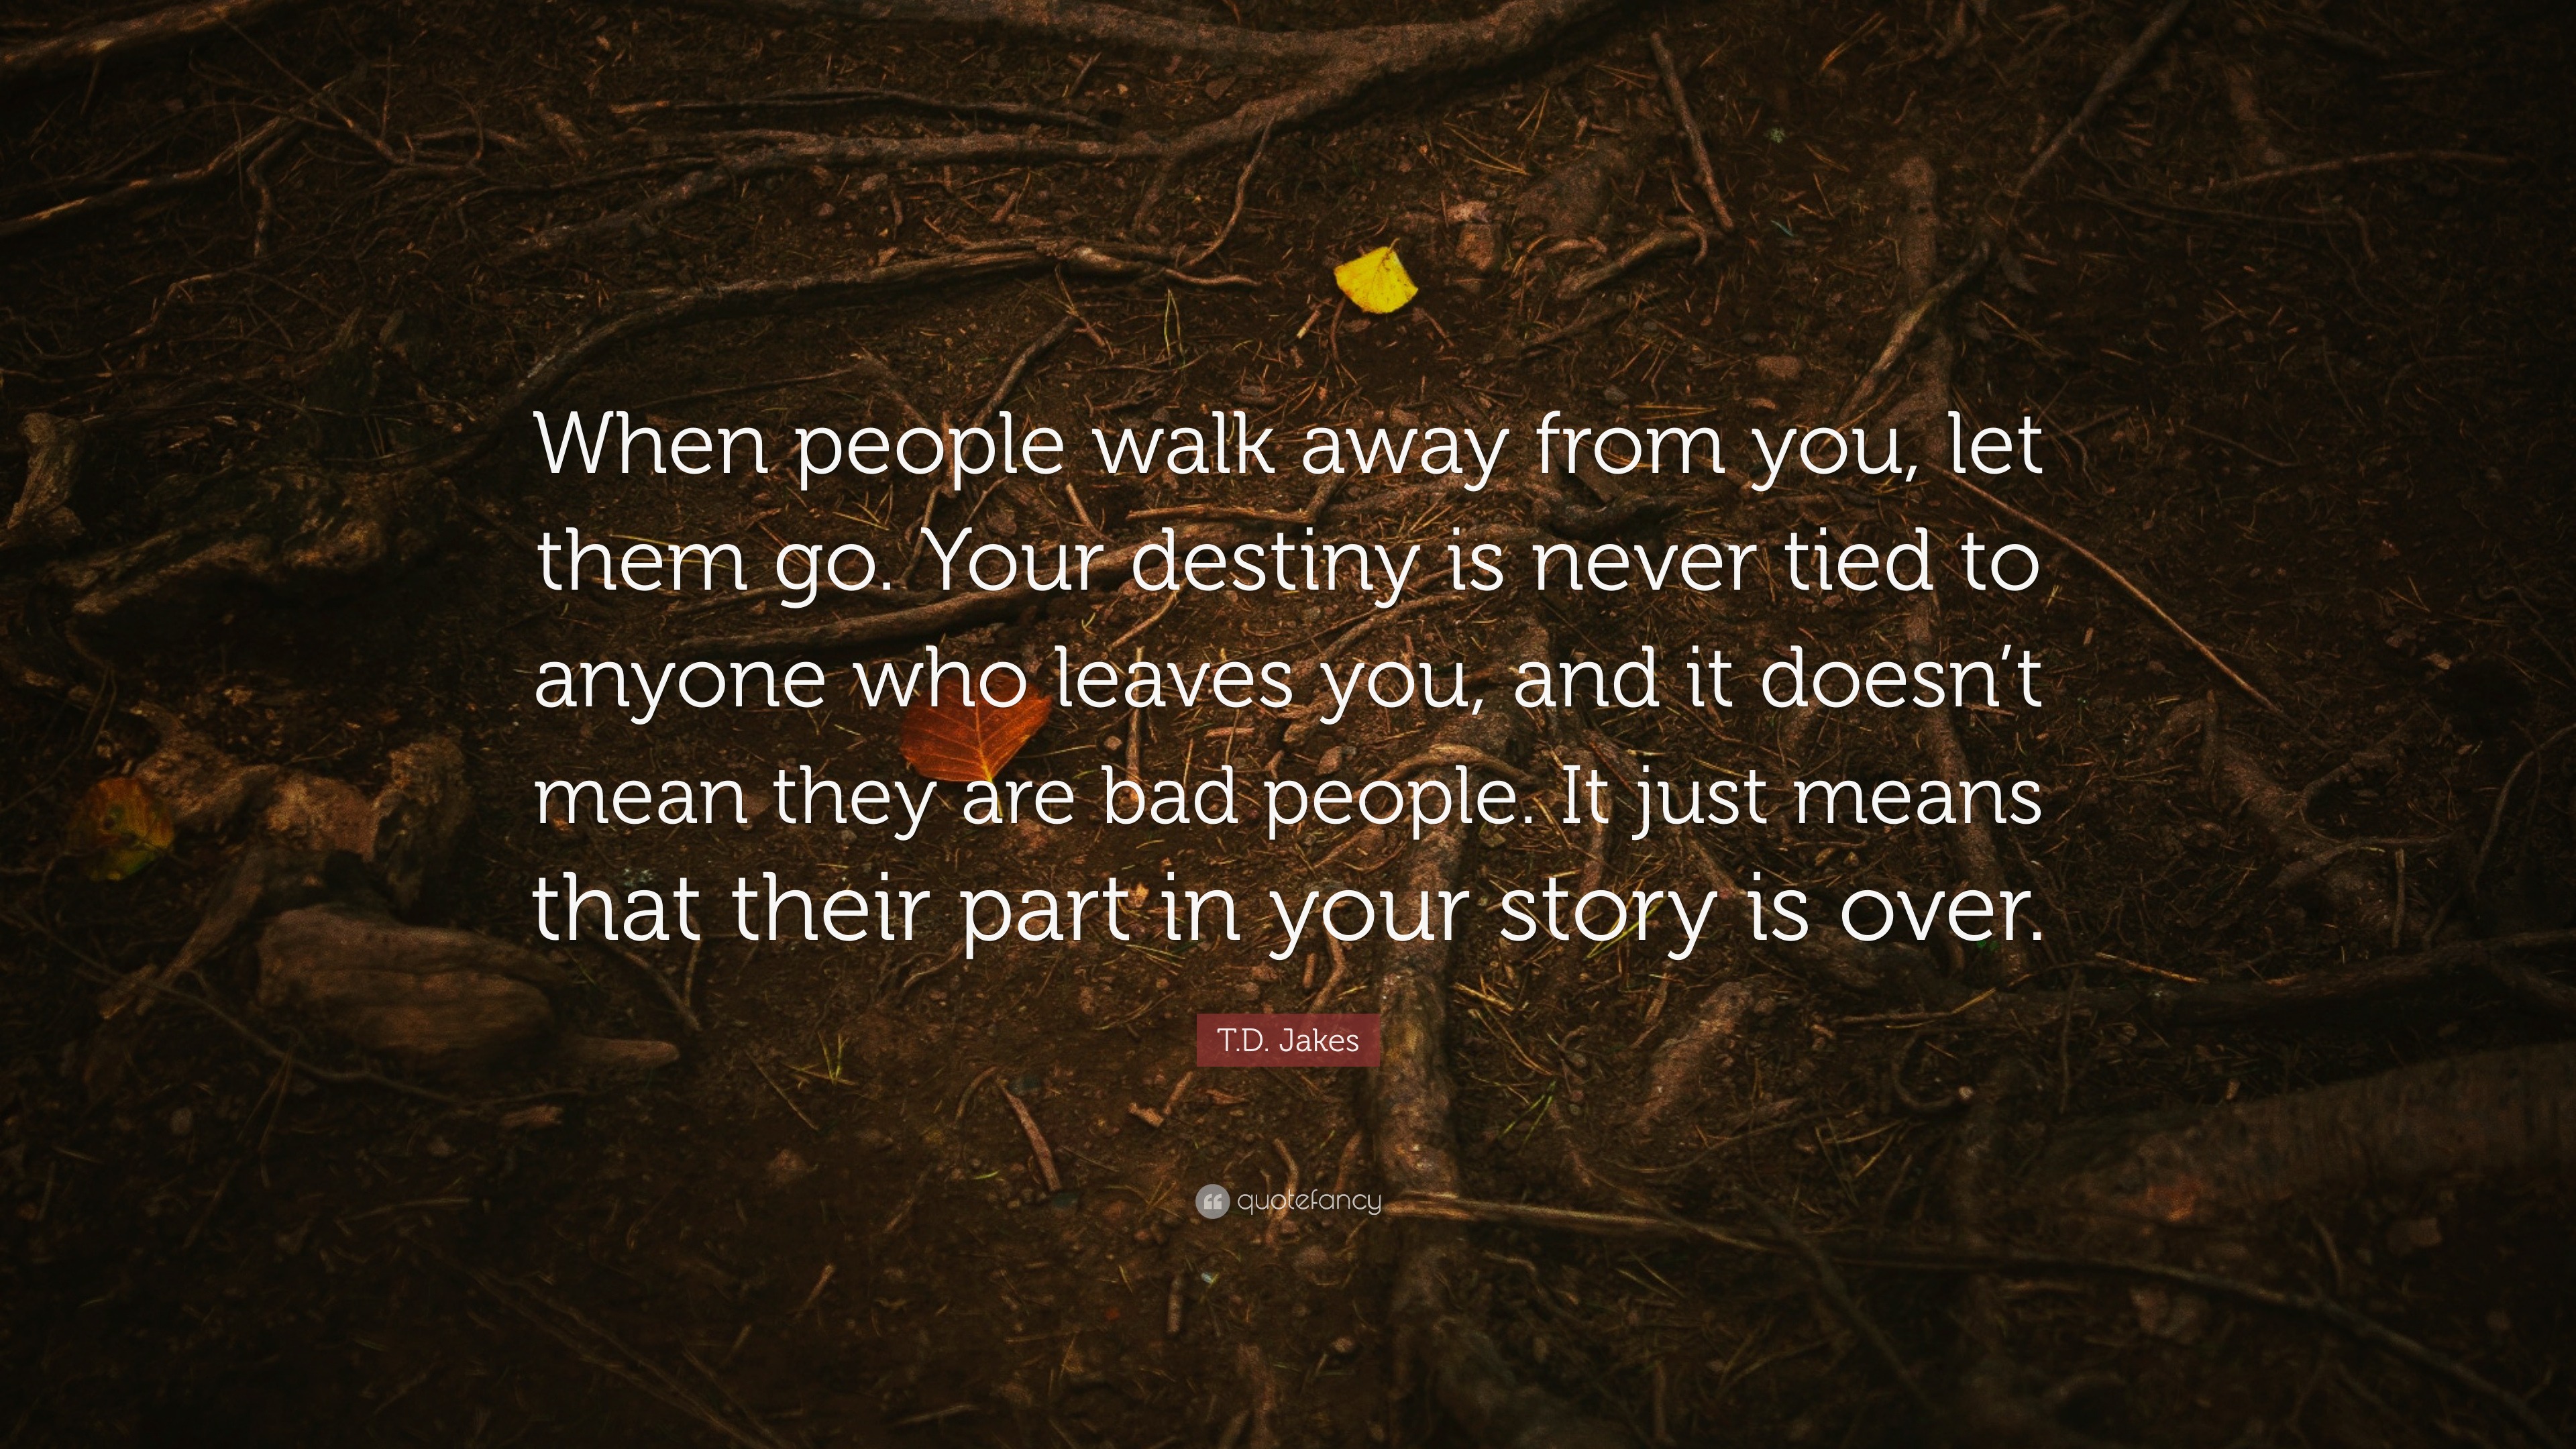 4681211 T D Jakes Quote When people walk away from you let them go Your